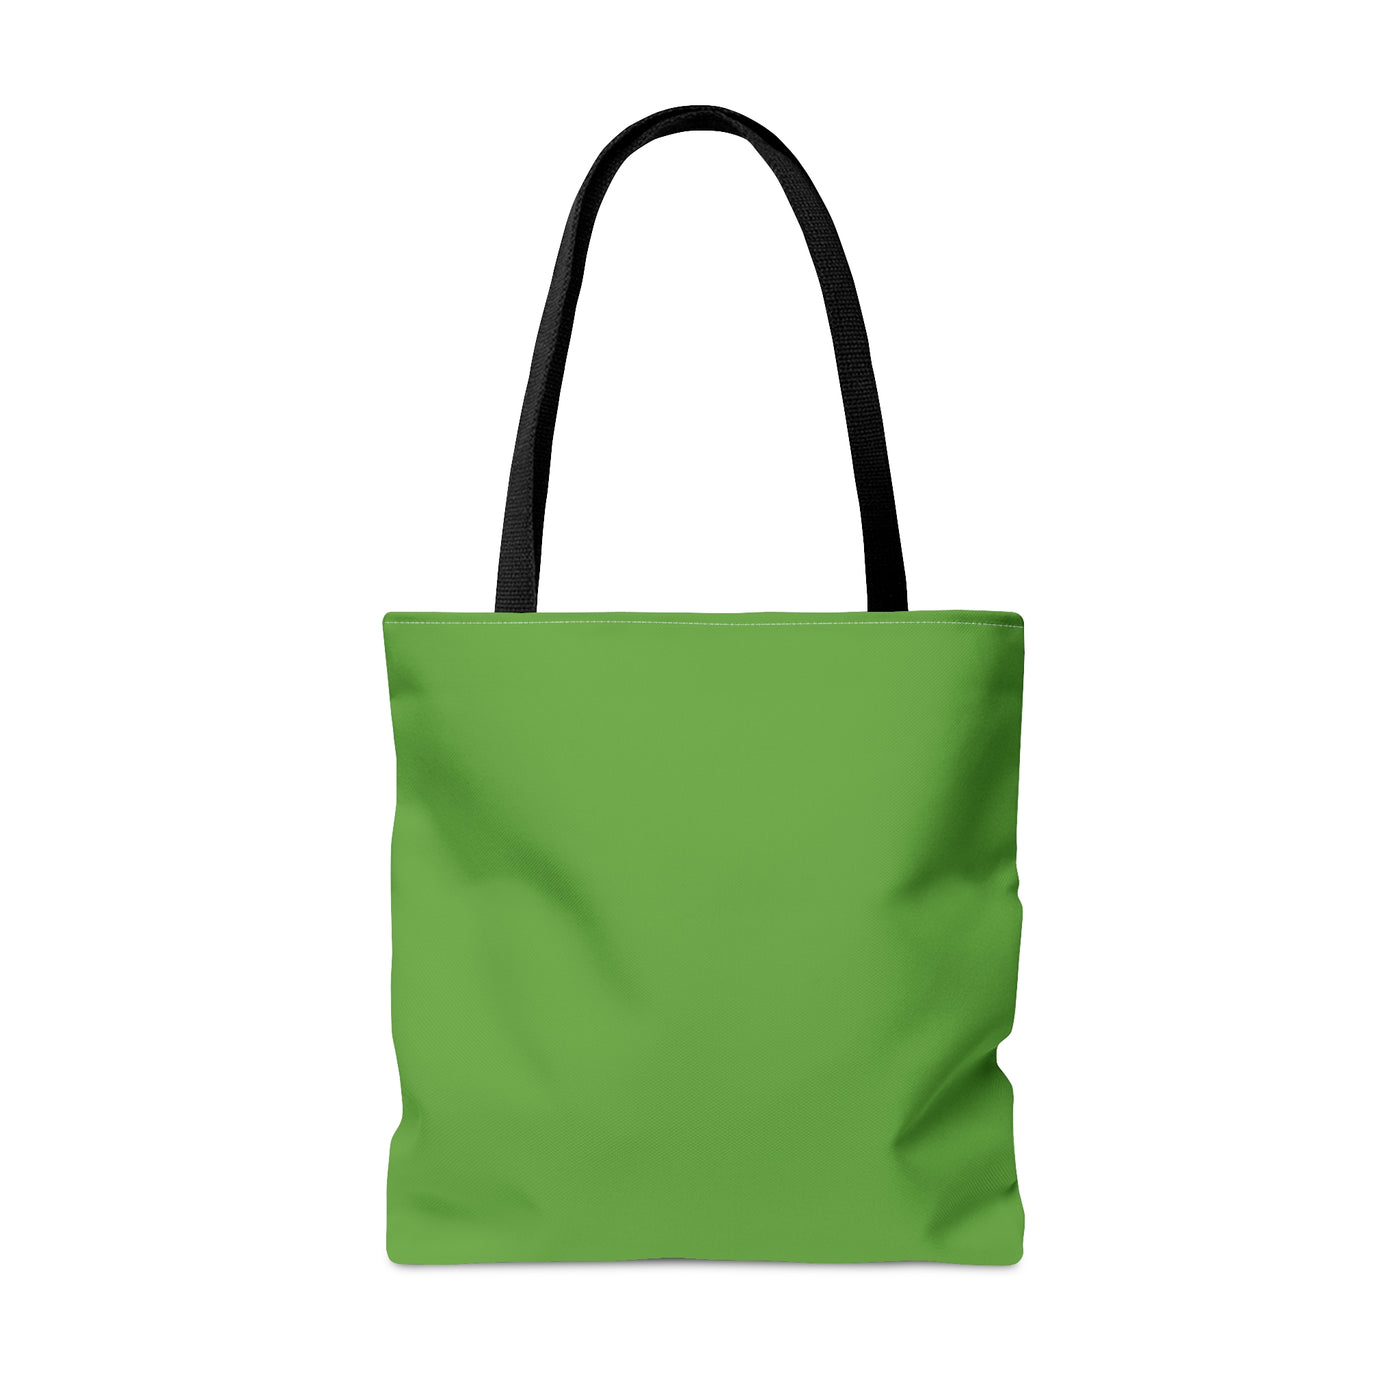 Green Tote Bags | Great Adventure Tote Bag | Let's Travel